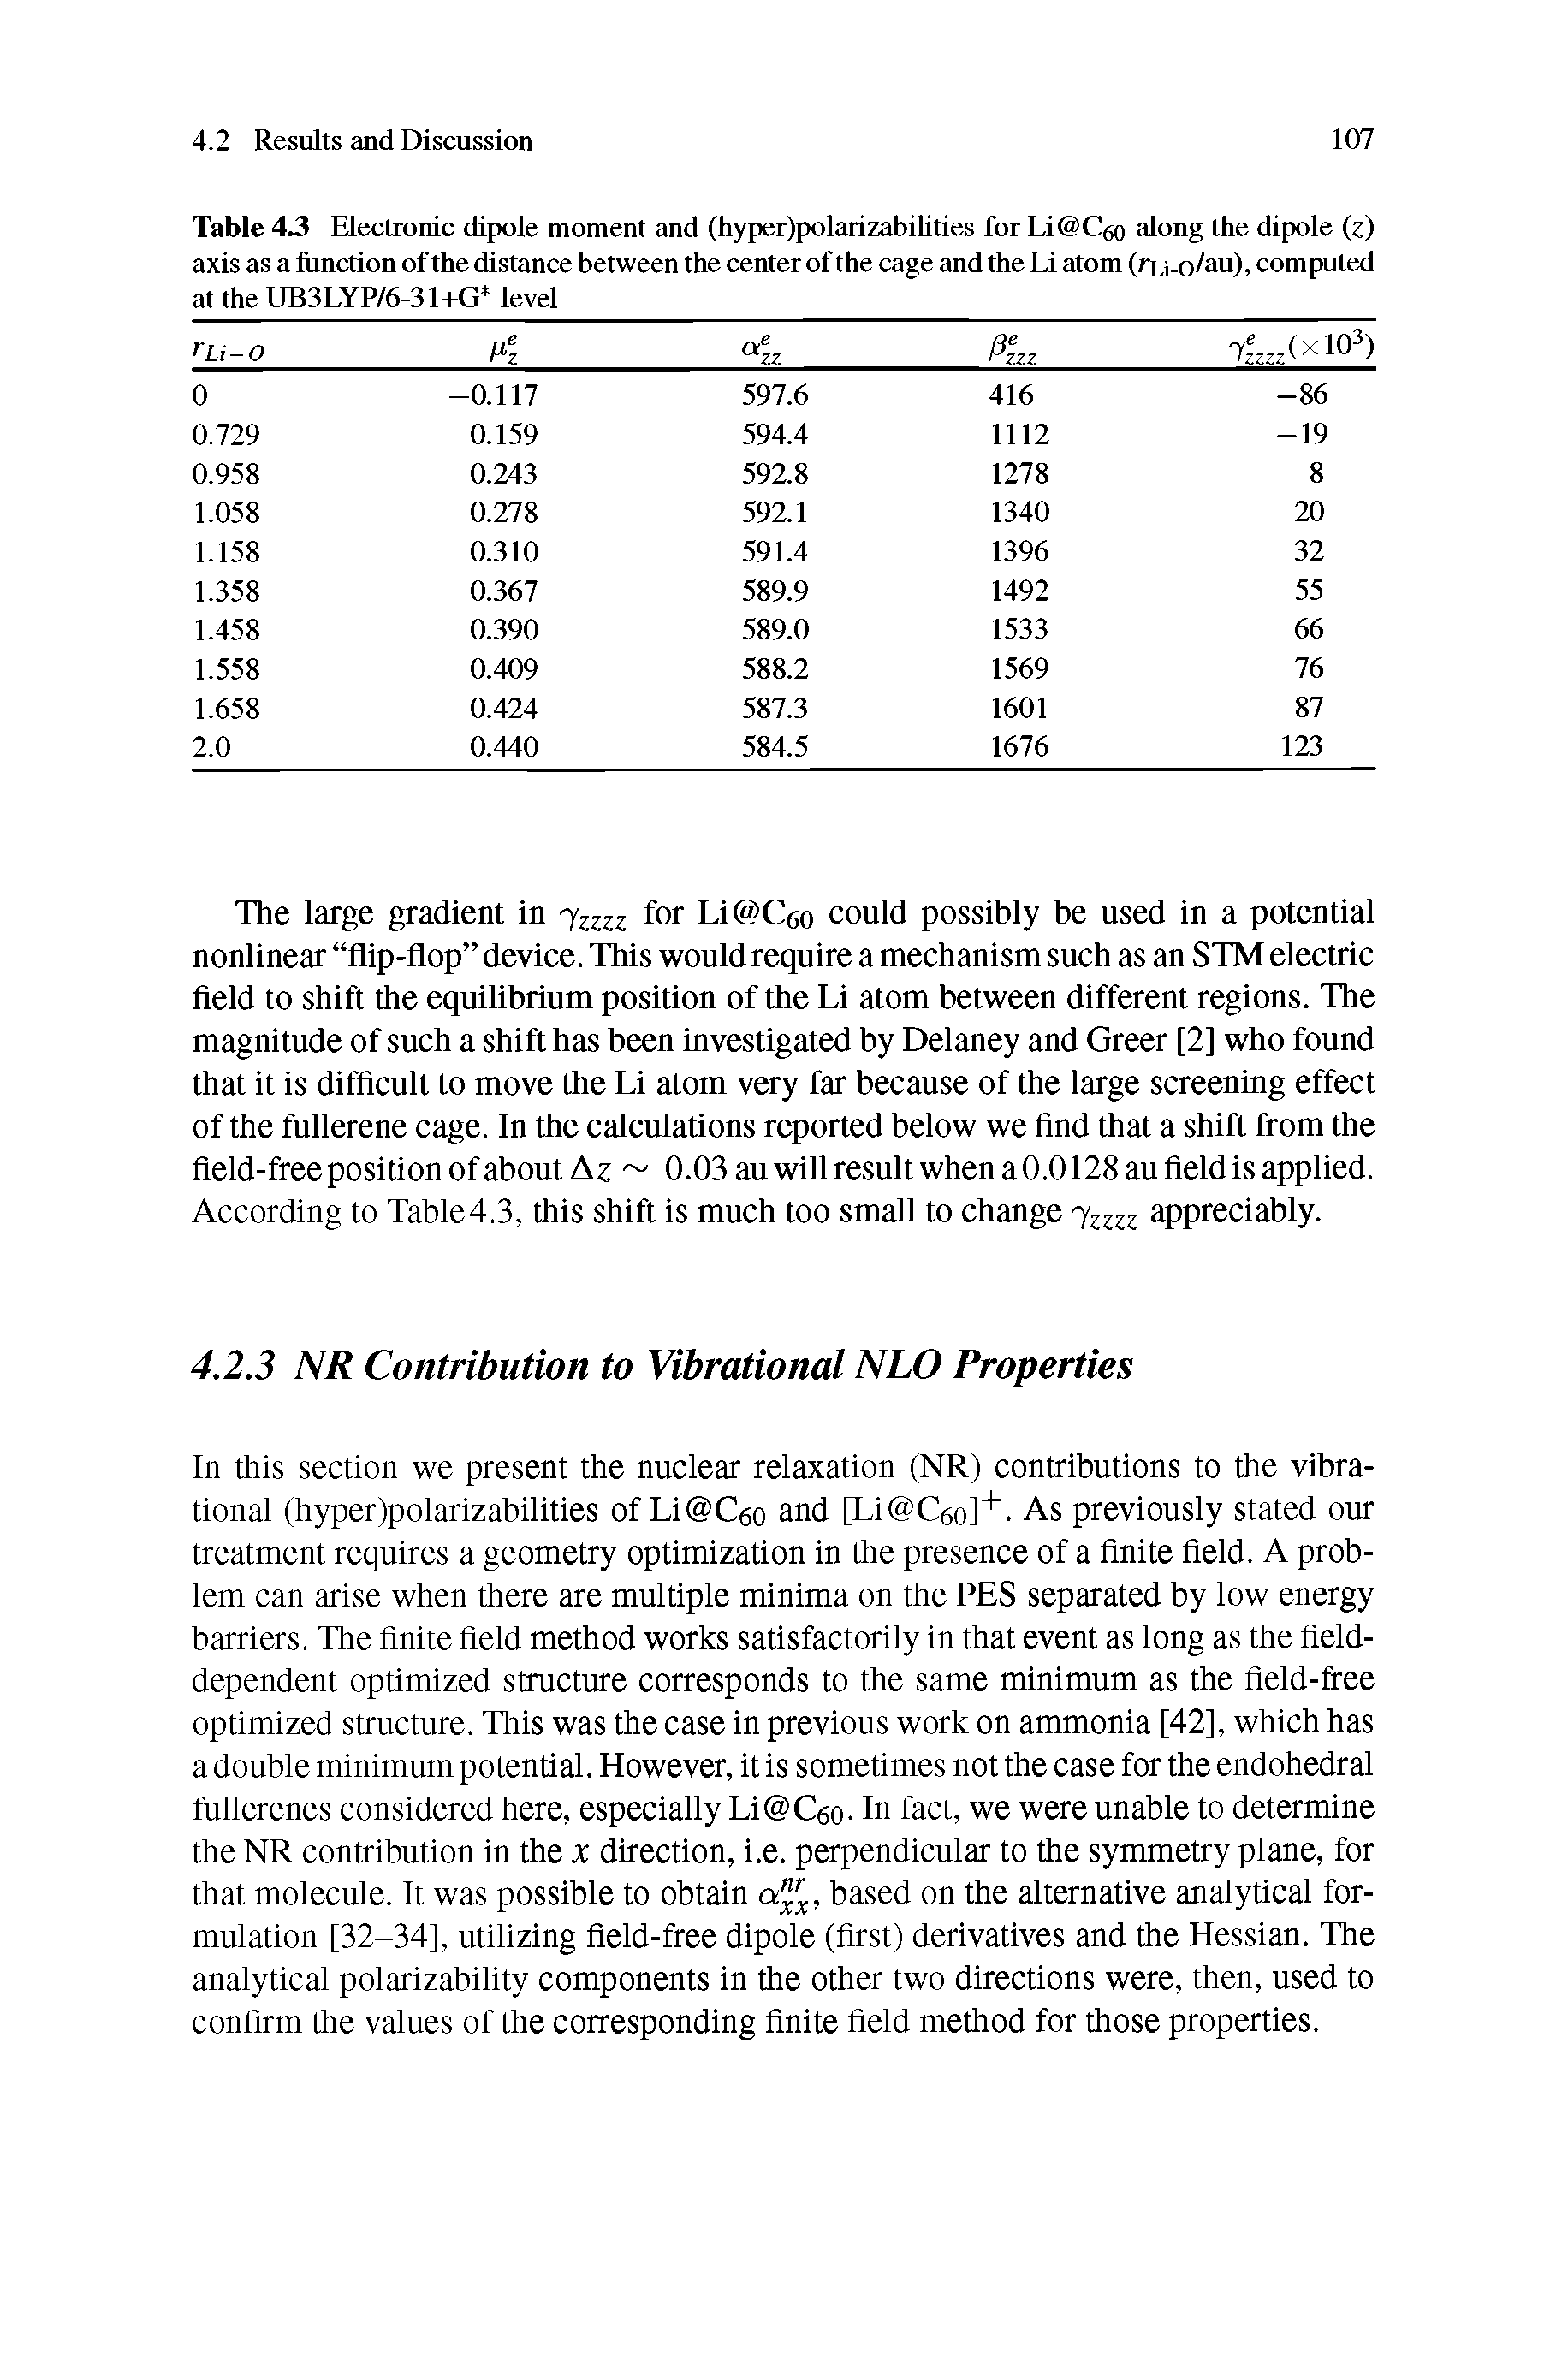 Table 4.3 Electronic dipole moment and (hyper)polarizabilities for Li Cgo along the dipole (z) axis as a function of the distance between the center of the cage and the Li atom (rLi-o au), computed at the UB3LYP/6-31+G level...